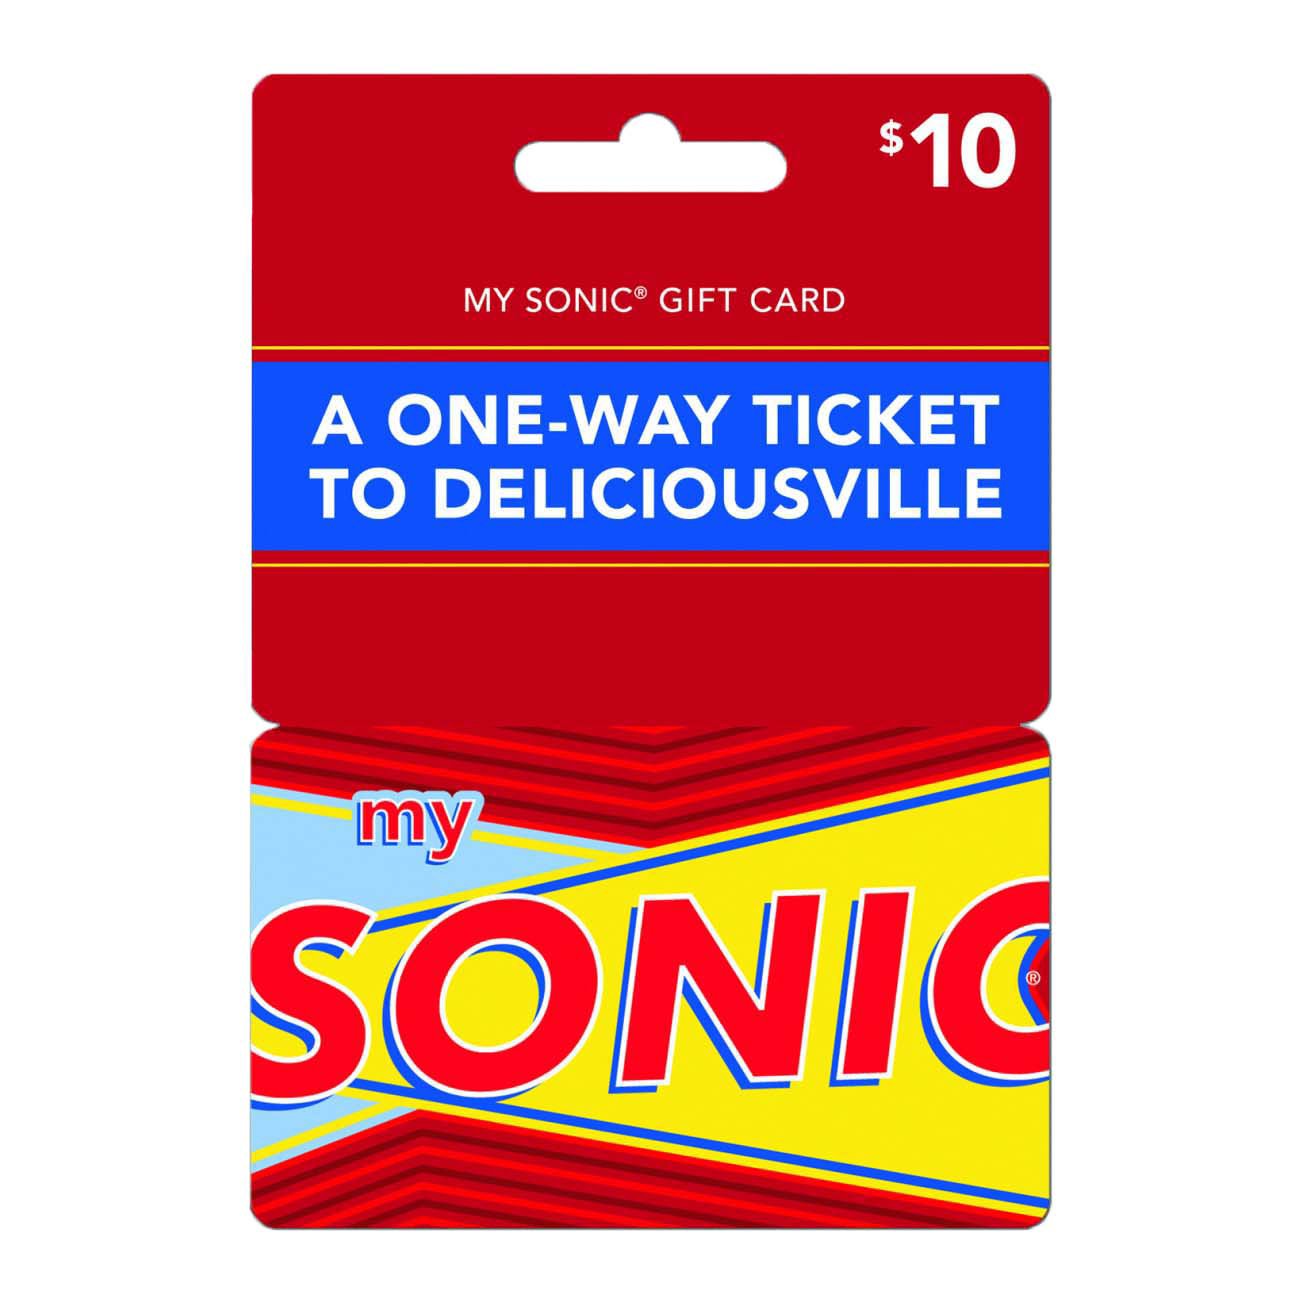 sonic-10-gift-card-shop-specialty-gift-cards-at-h-e-b